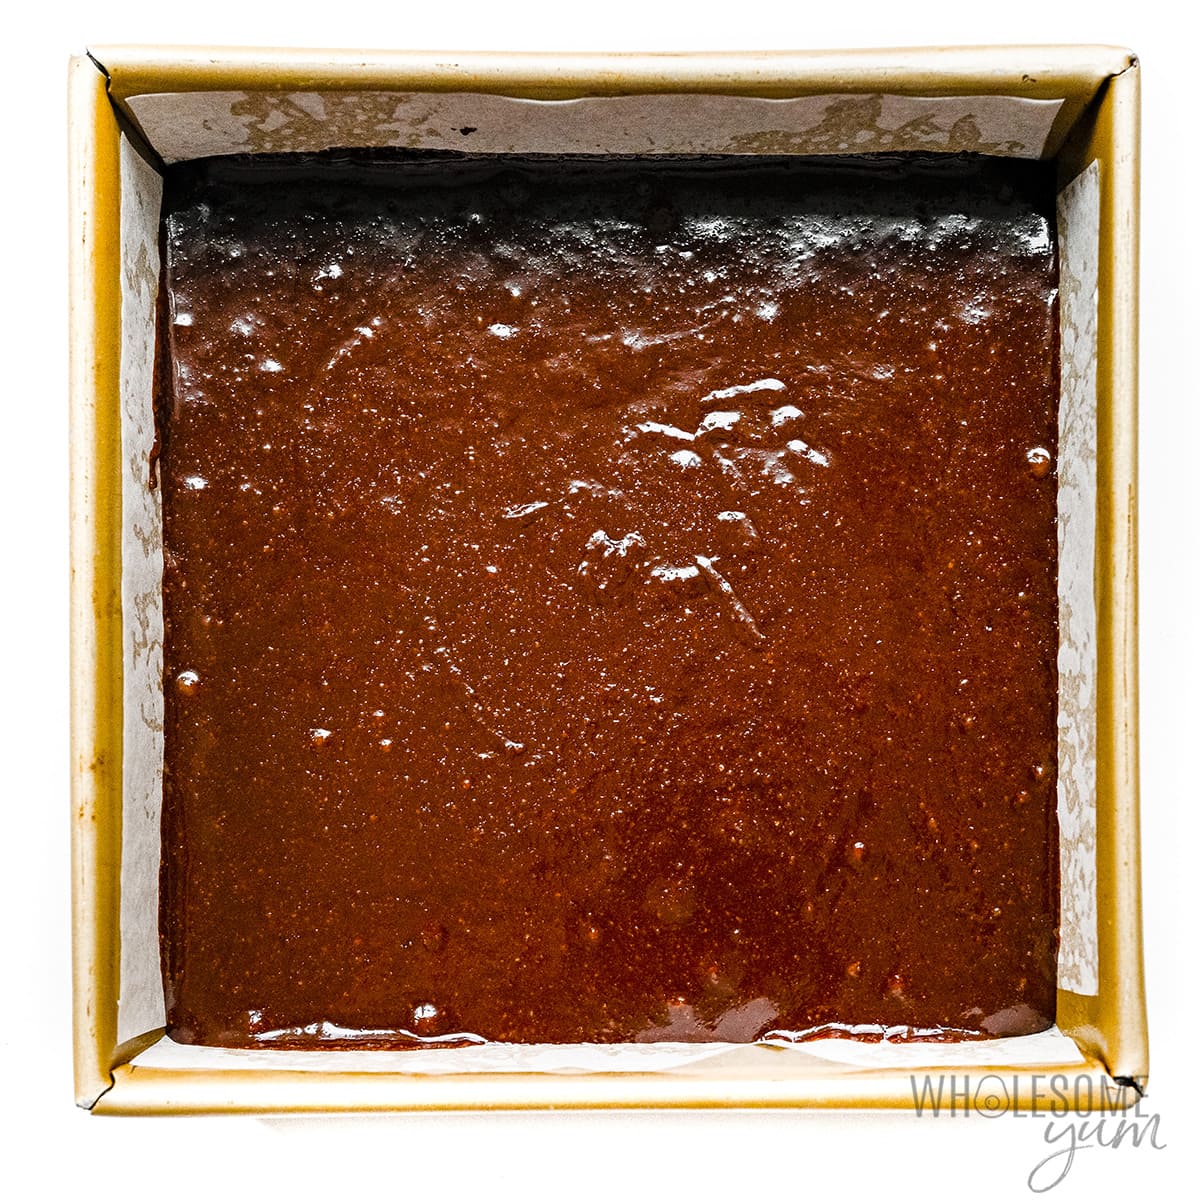 Batter poured into square baking pan. 